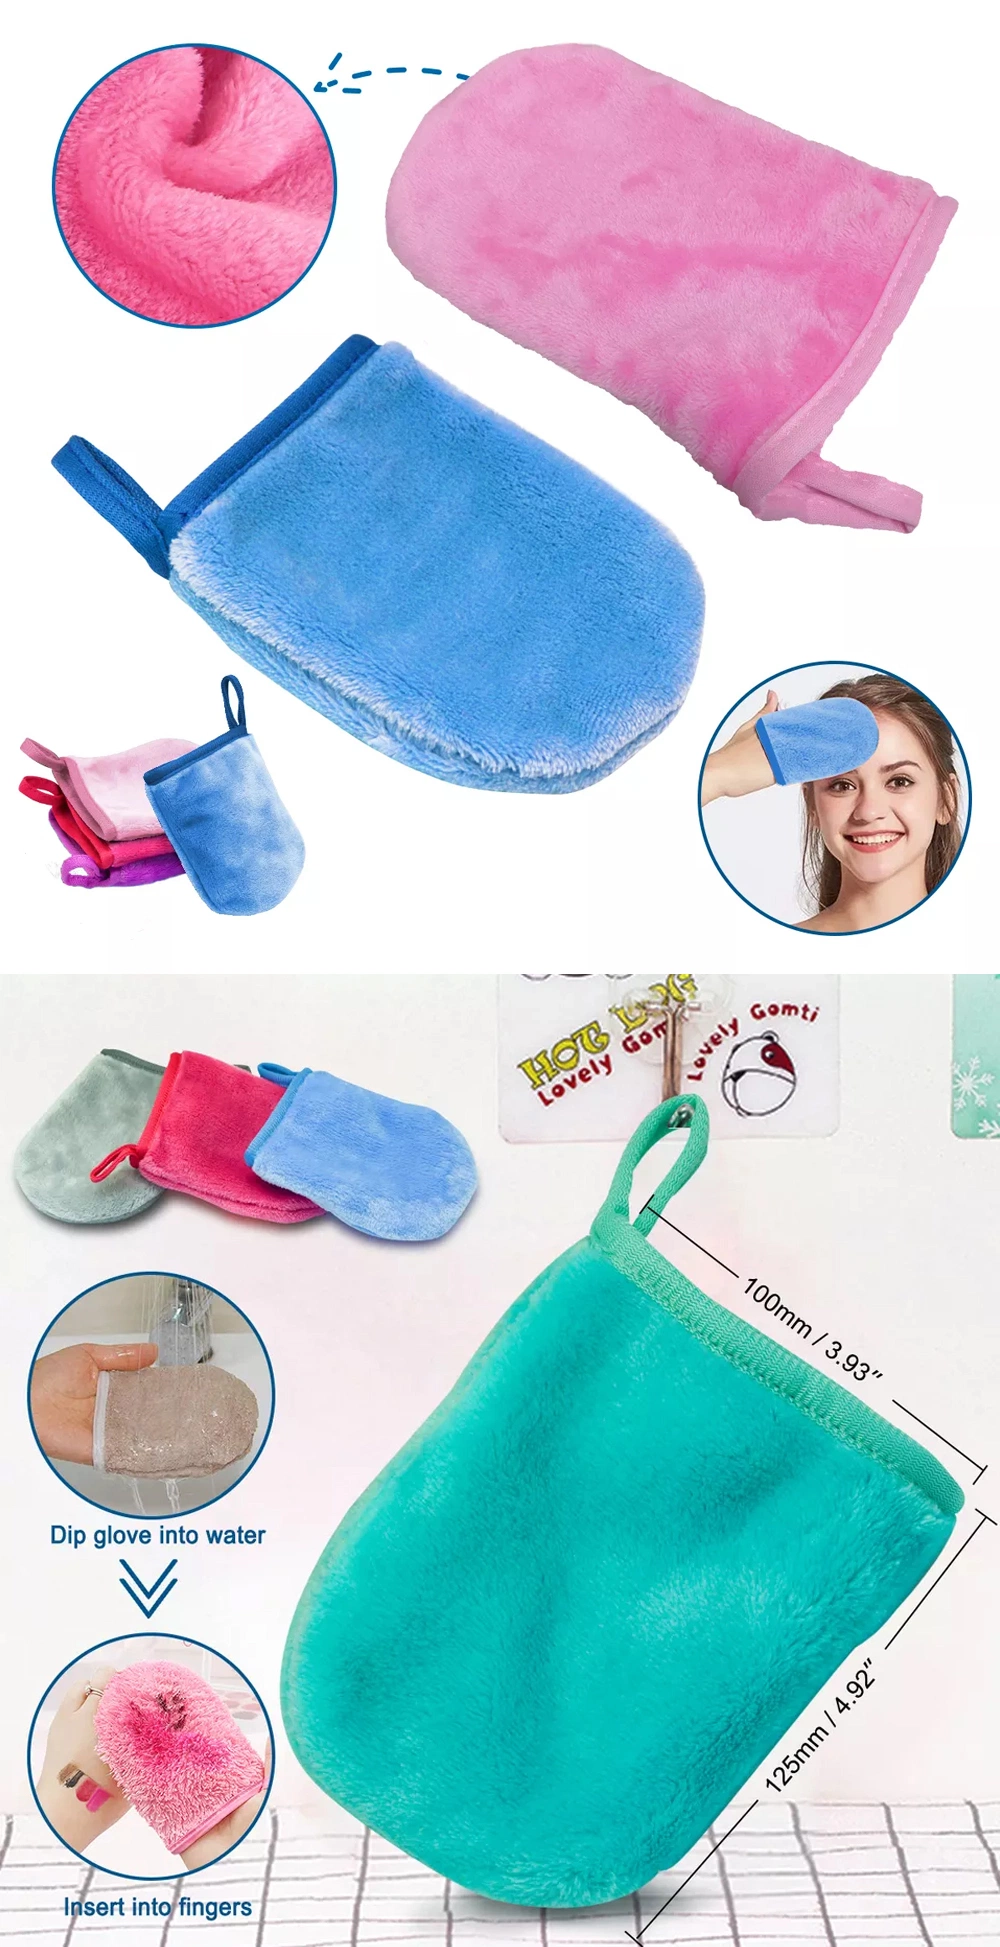 Microfiber Flannel Facial Cleaning Cloth Magic Pocket Makeup Removal Towel Soft Microfiber Cloth Pads Reusable Remover Face Cleansing Towel Powerful Women Washa